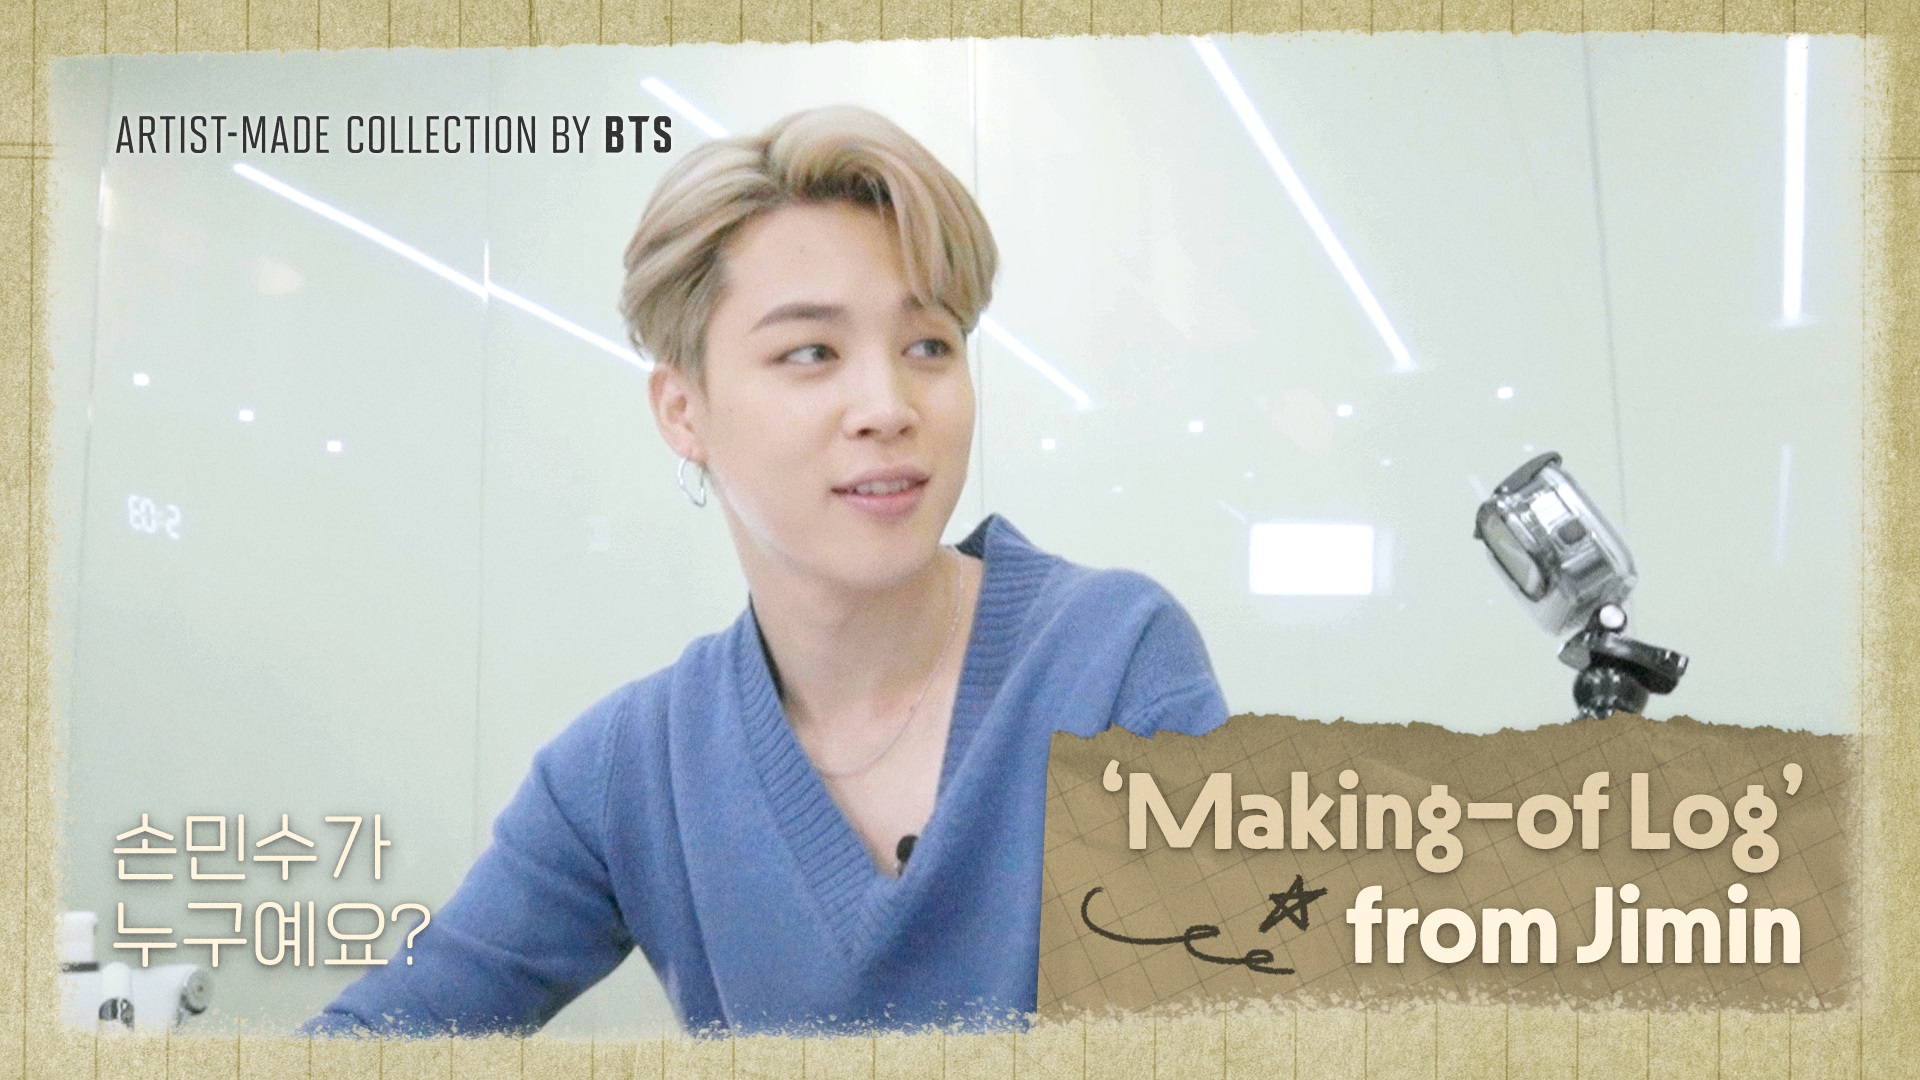 ARTIST-MADE COLLECTION BY BTS 'Making-of Log' from Jimin